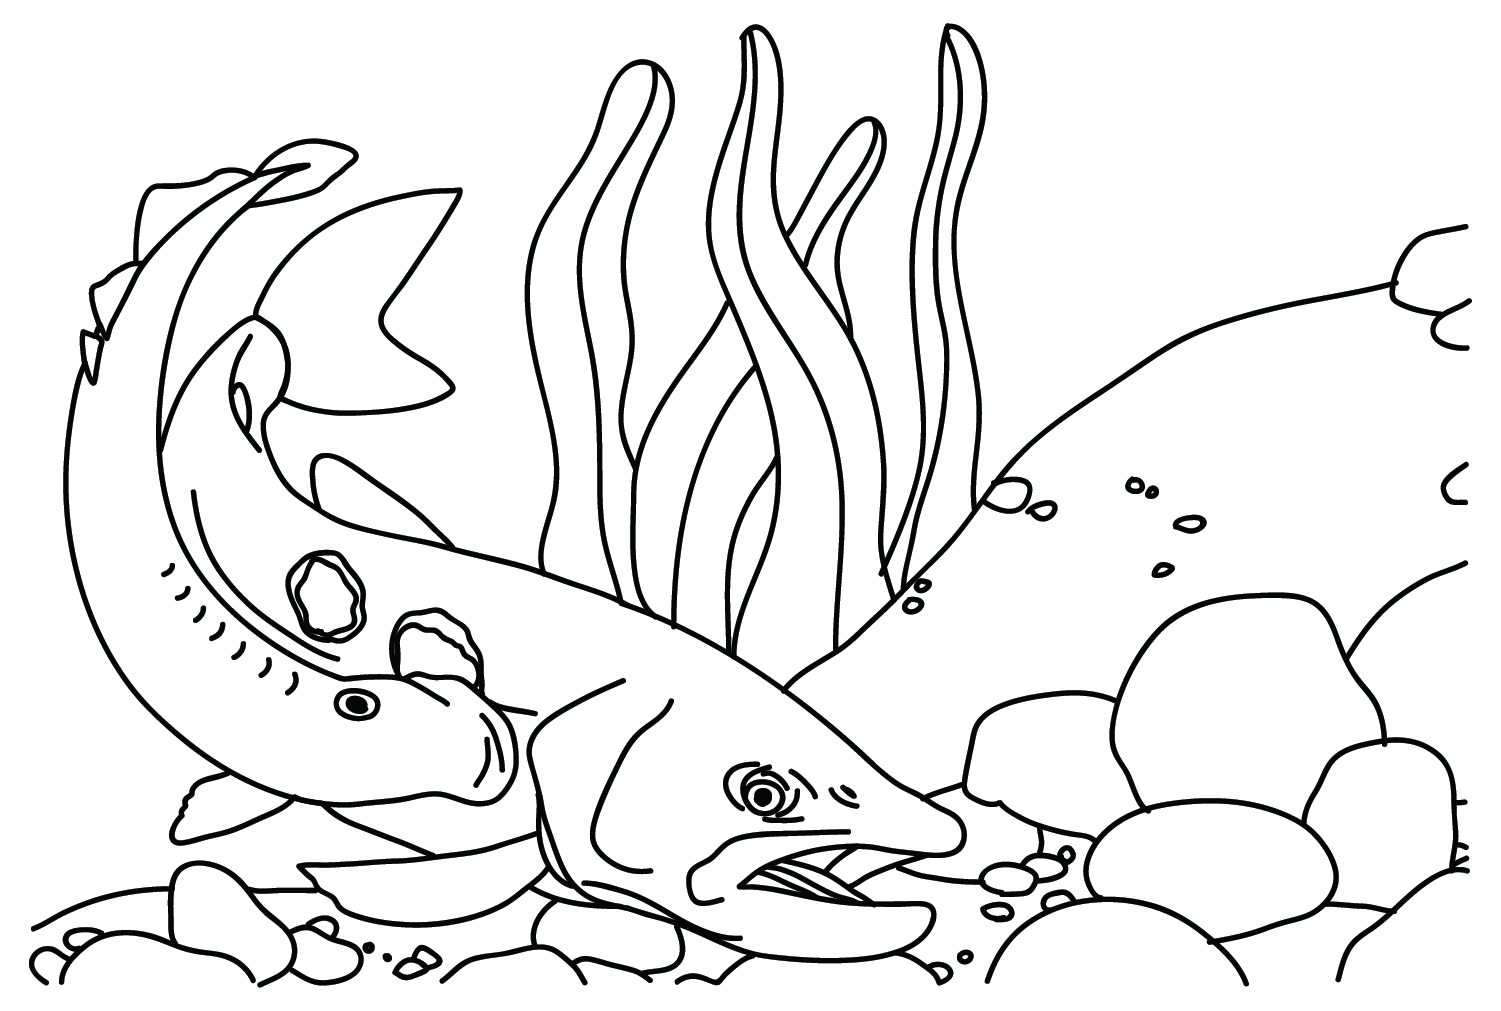 Lamprey Bites Fish Coloring Page - Free Printable Coloring Pages